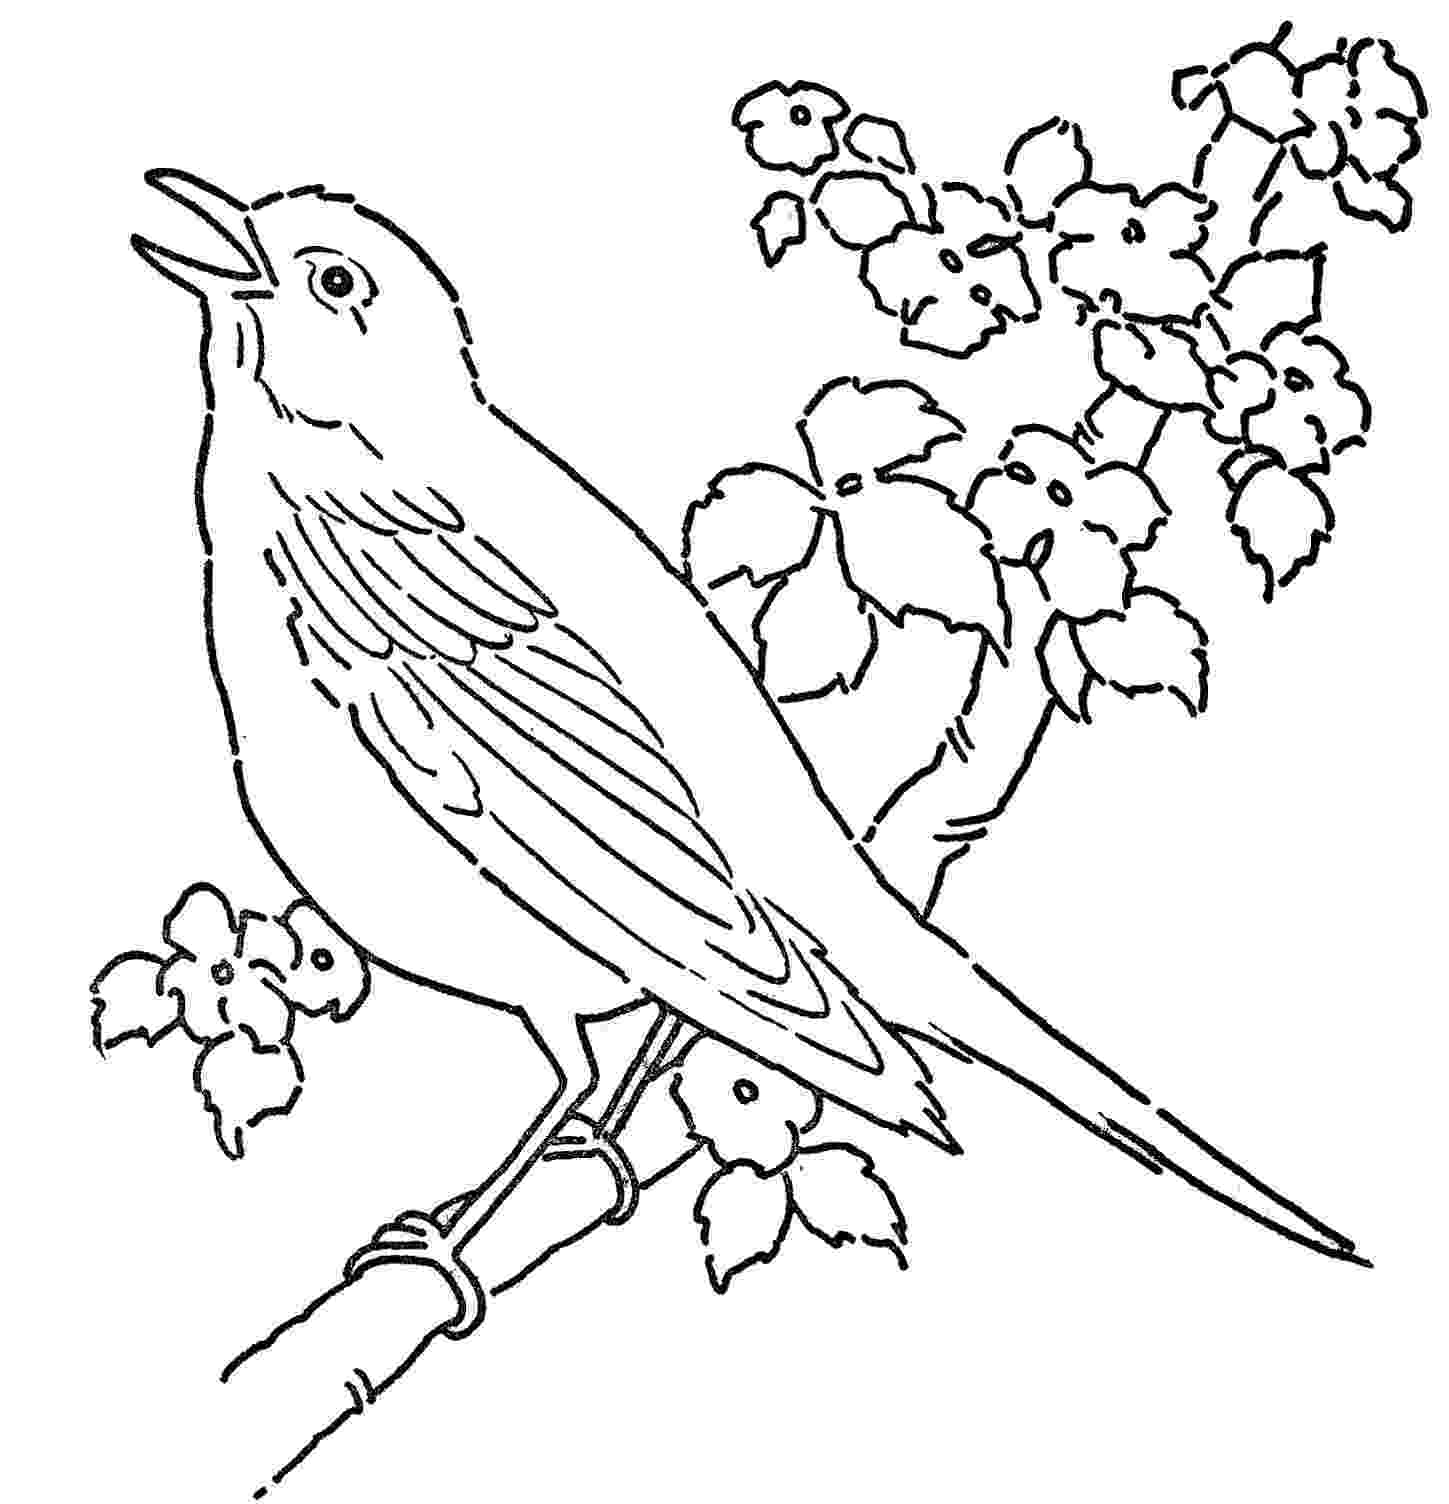 bird color page bird coloring pages to download and print for free color page bird 